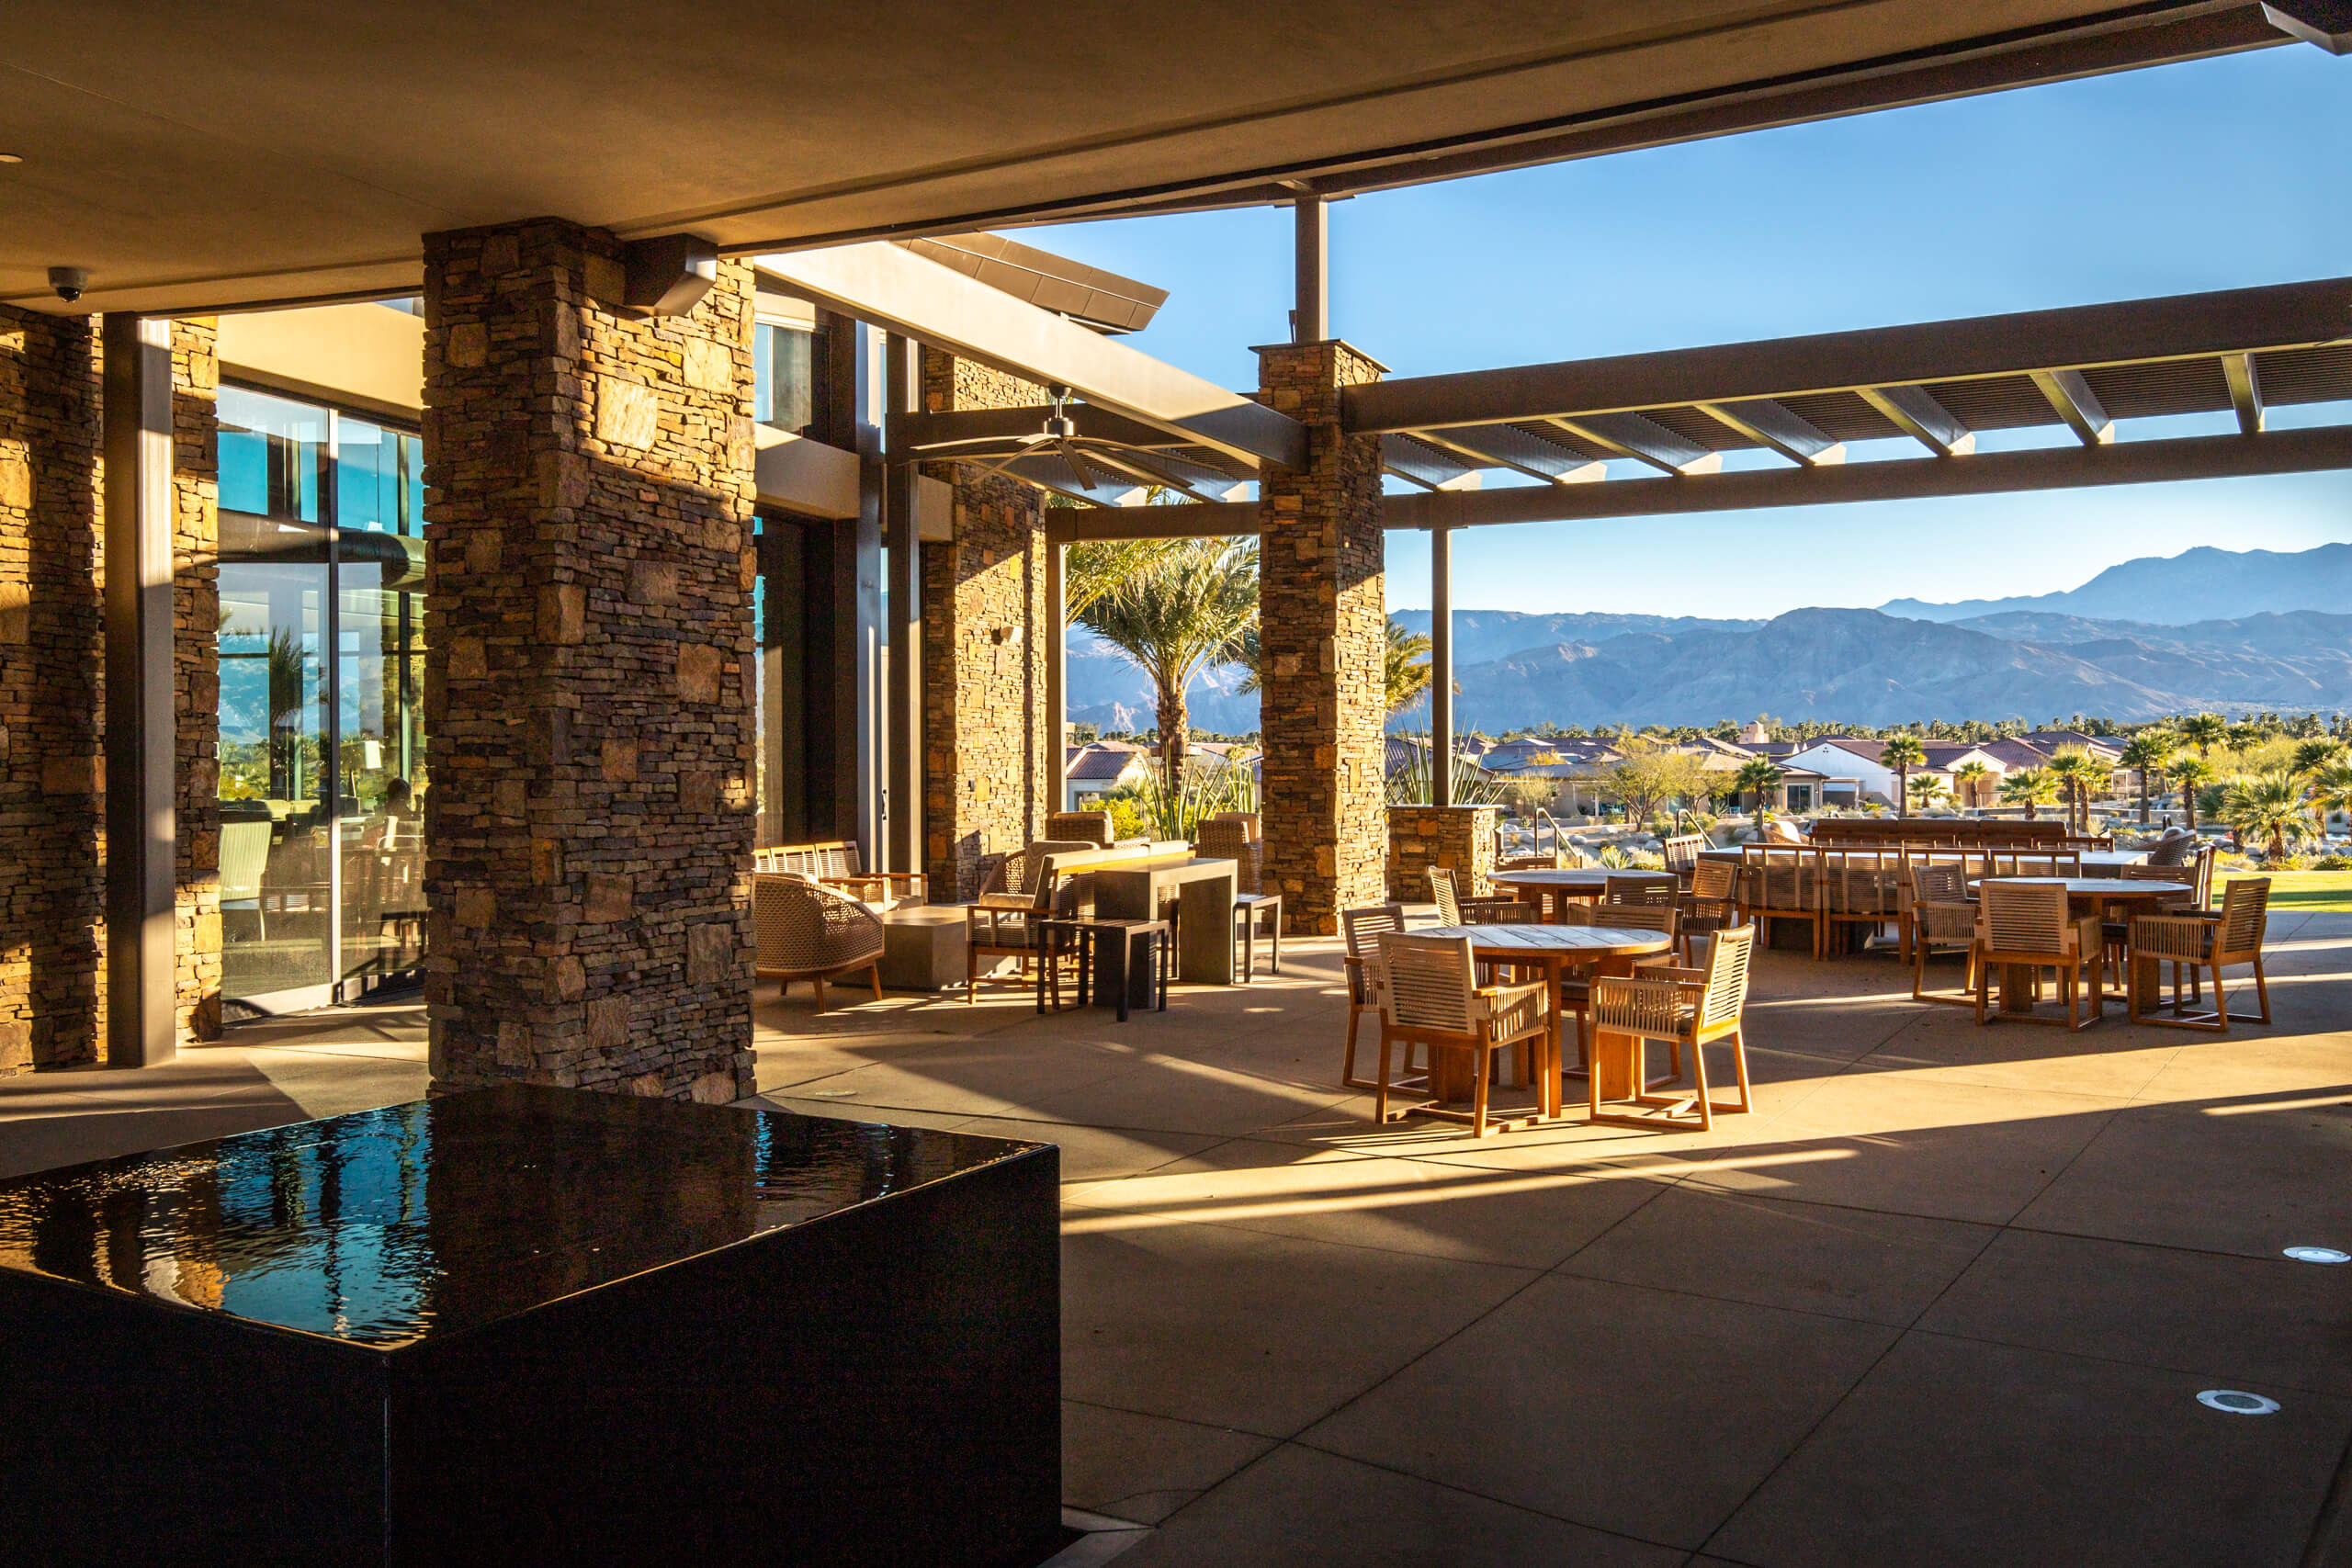 Del webb rancho mirage clubhouse view